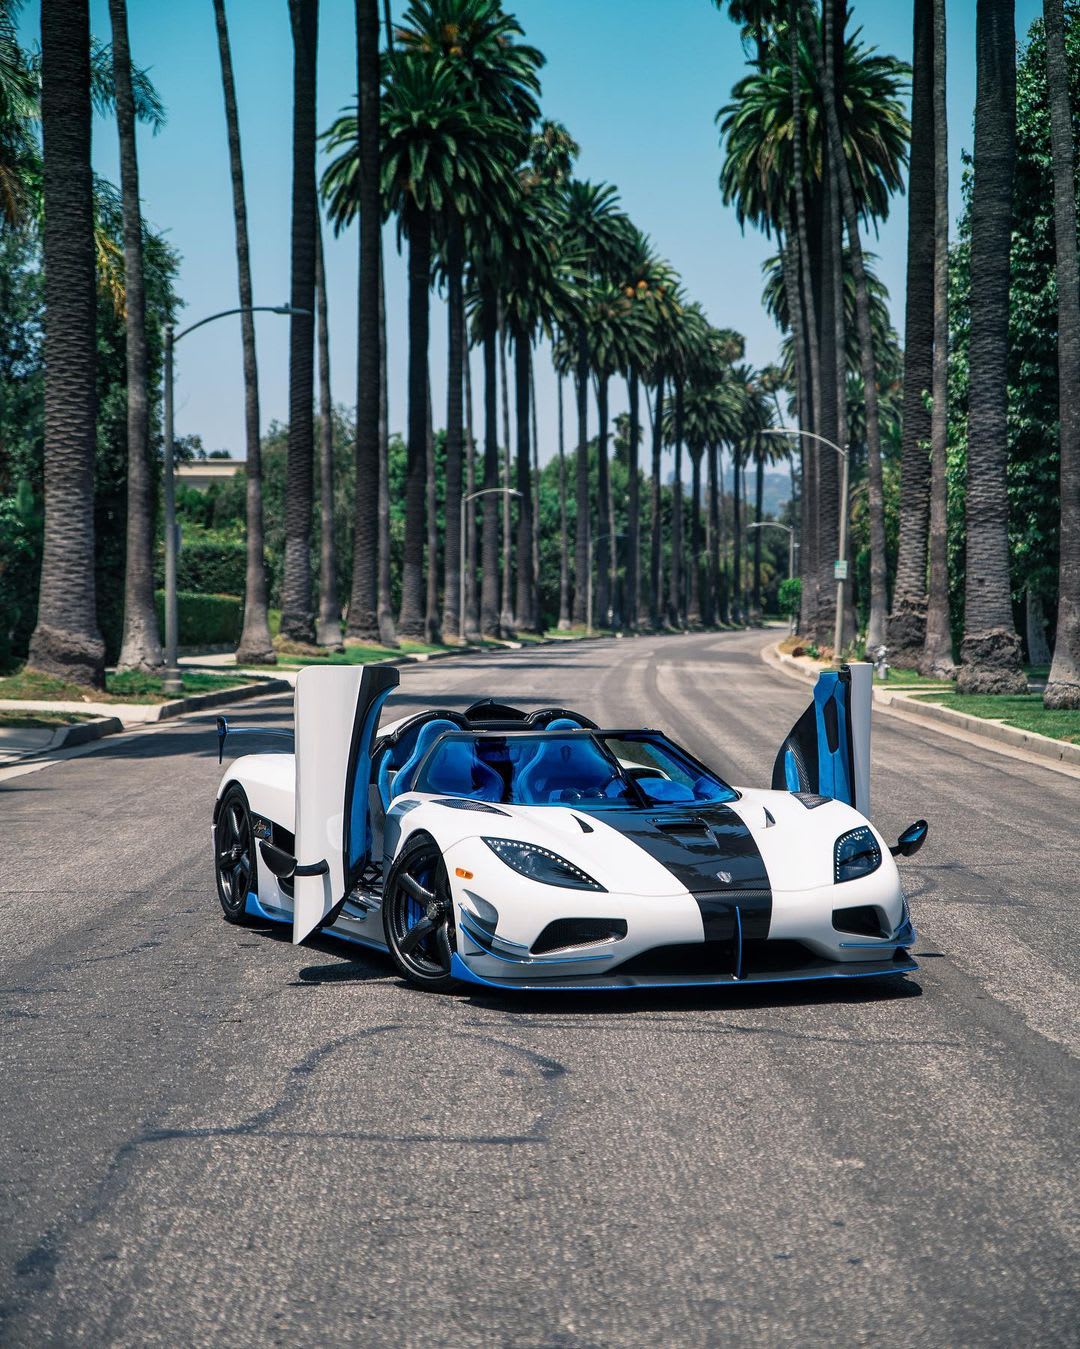 Koenigsegg Agera RS1 (Chassis #7136) in Los Angeles, California - photo from last weekend.